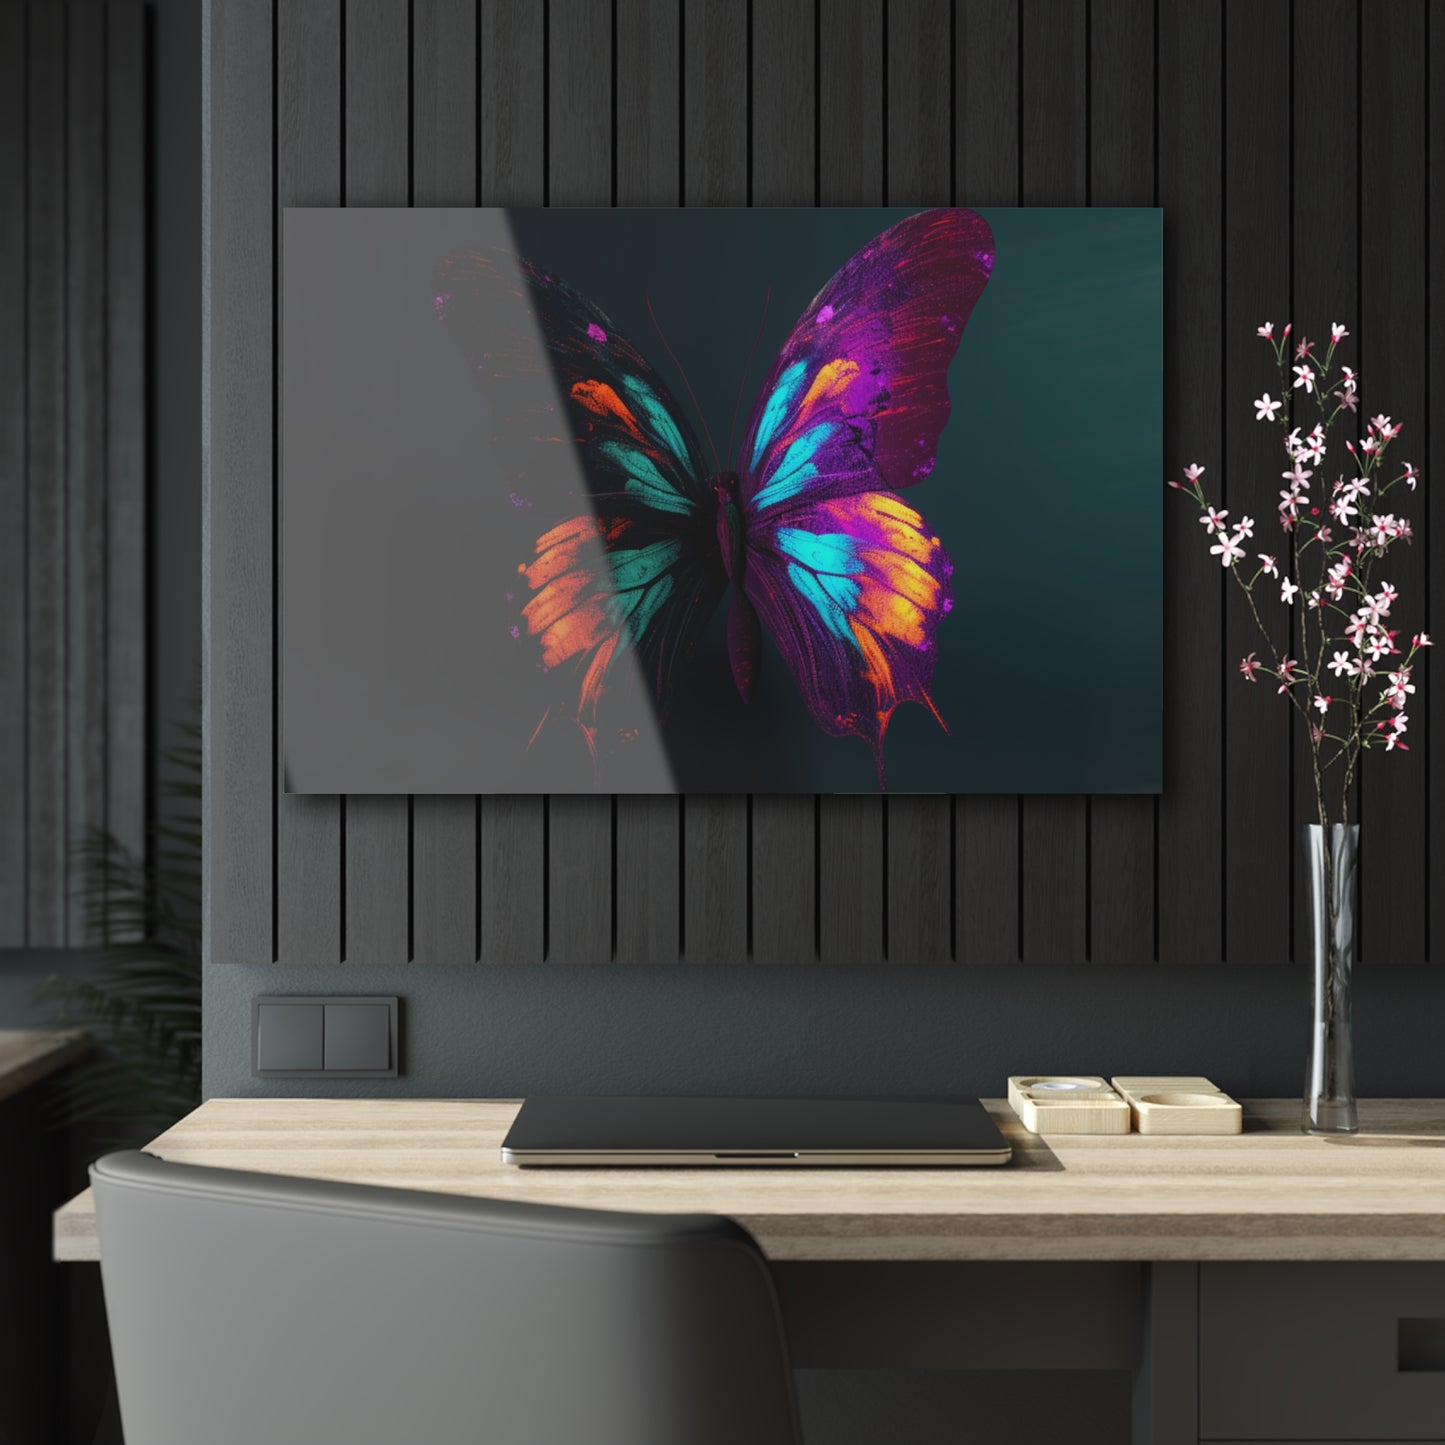 Acrylic Prints Hyper Colorful Butterfly Purple 2